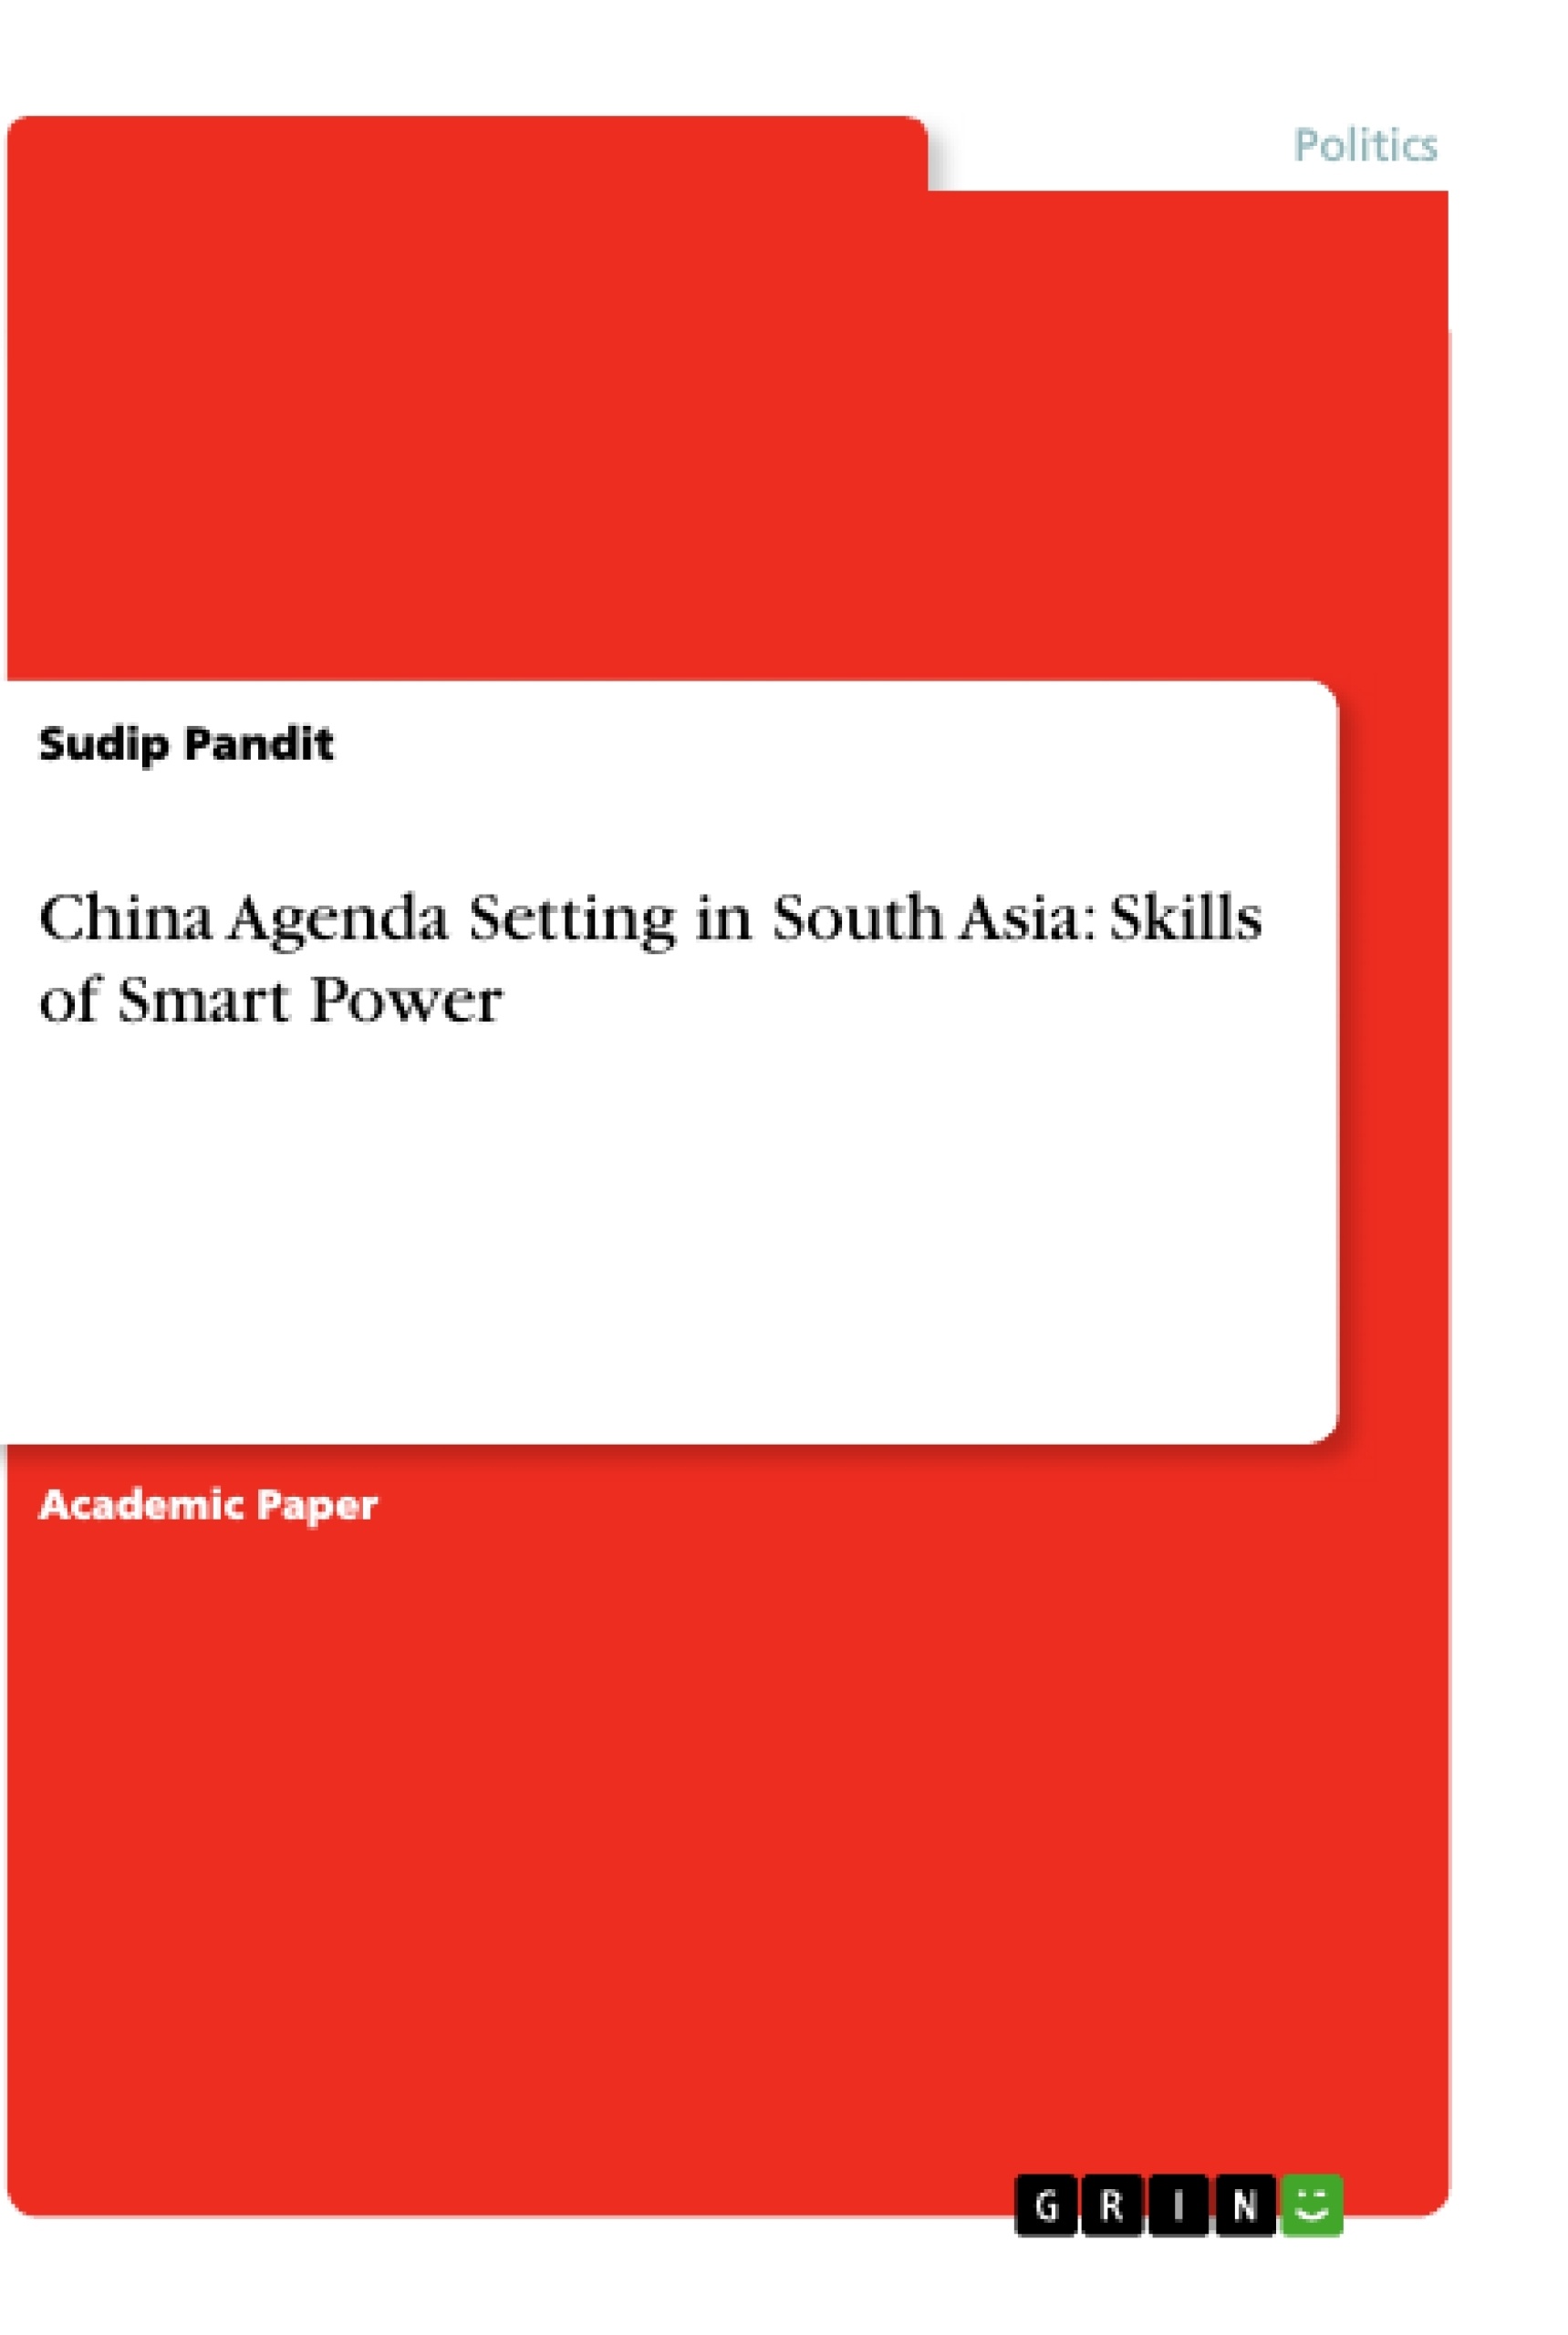 Title: China Agenda Setting in South Asia: Skills of Smart Power